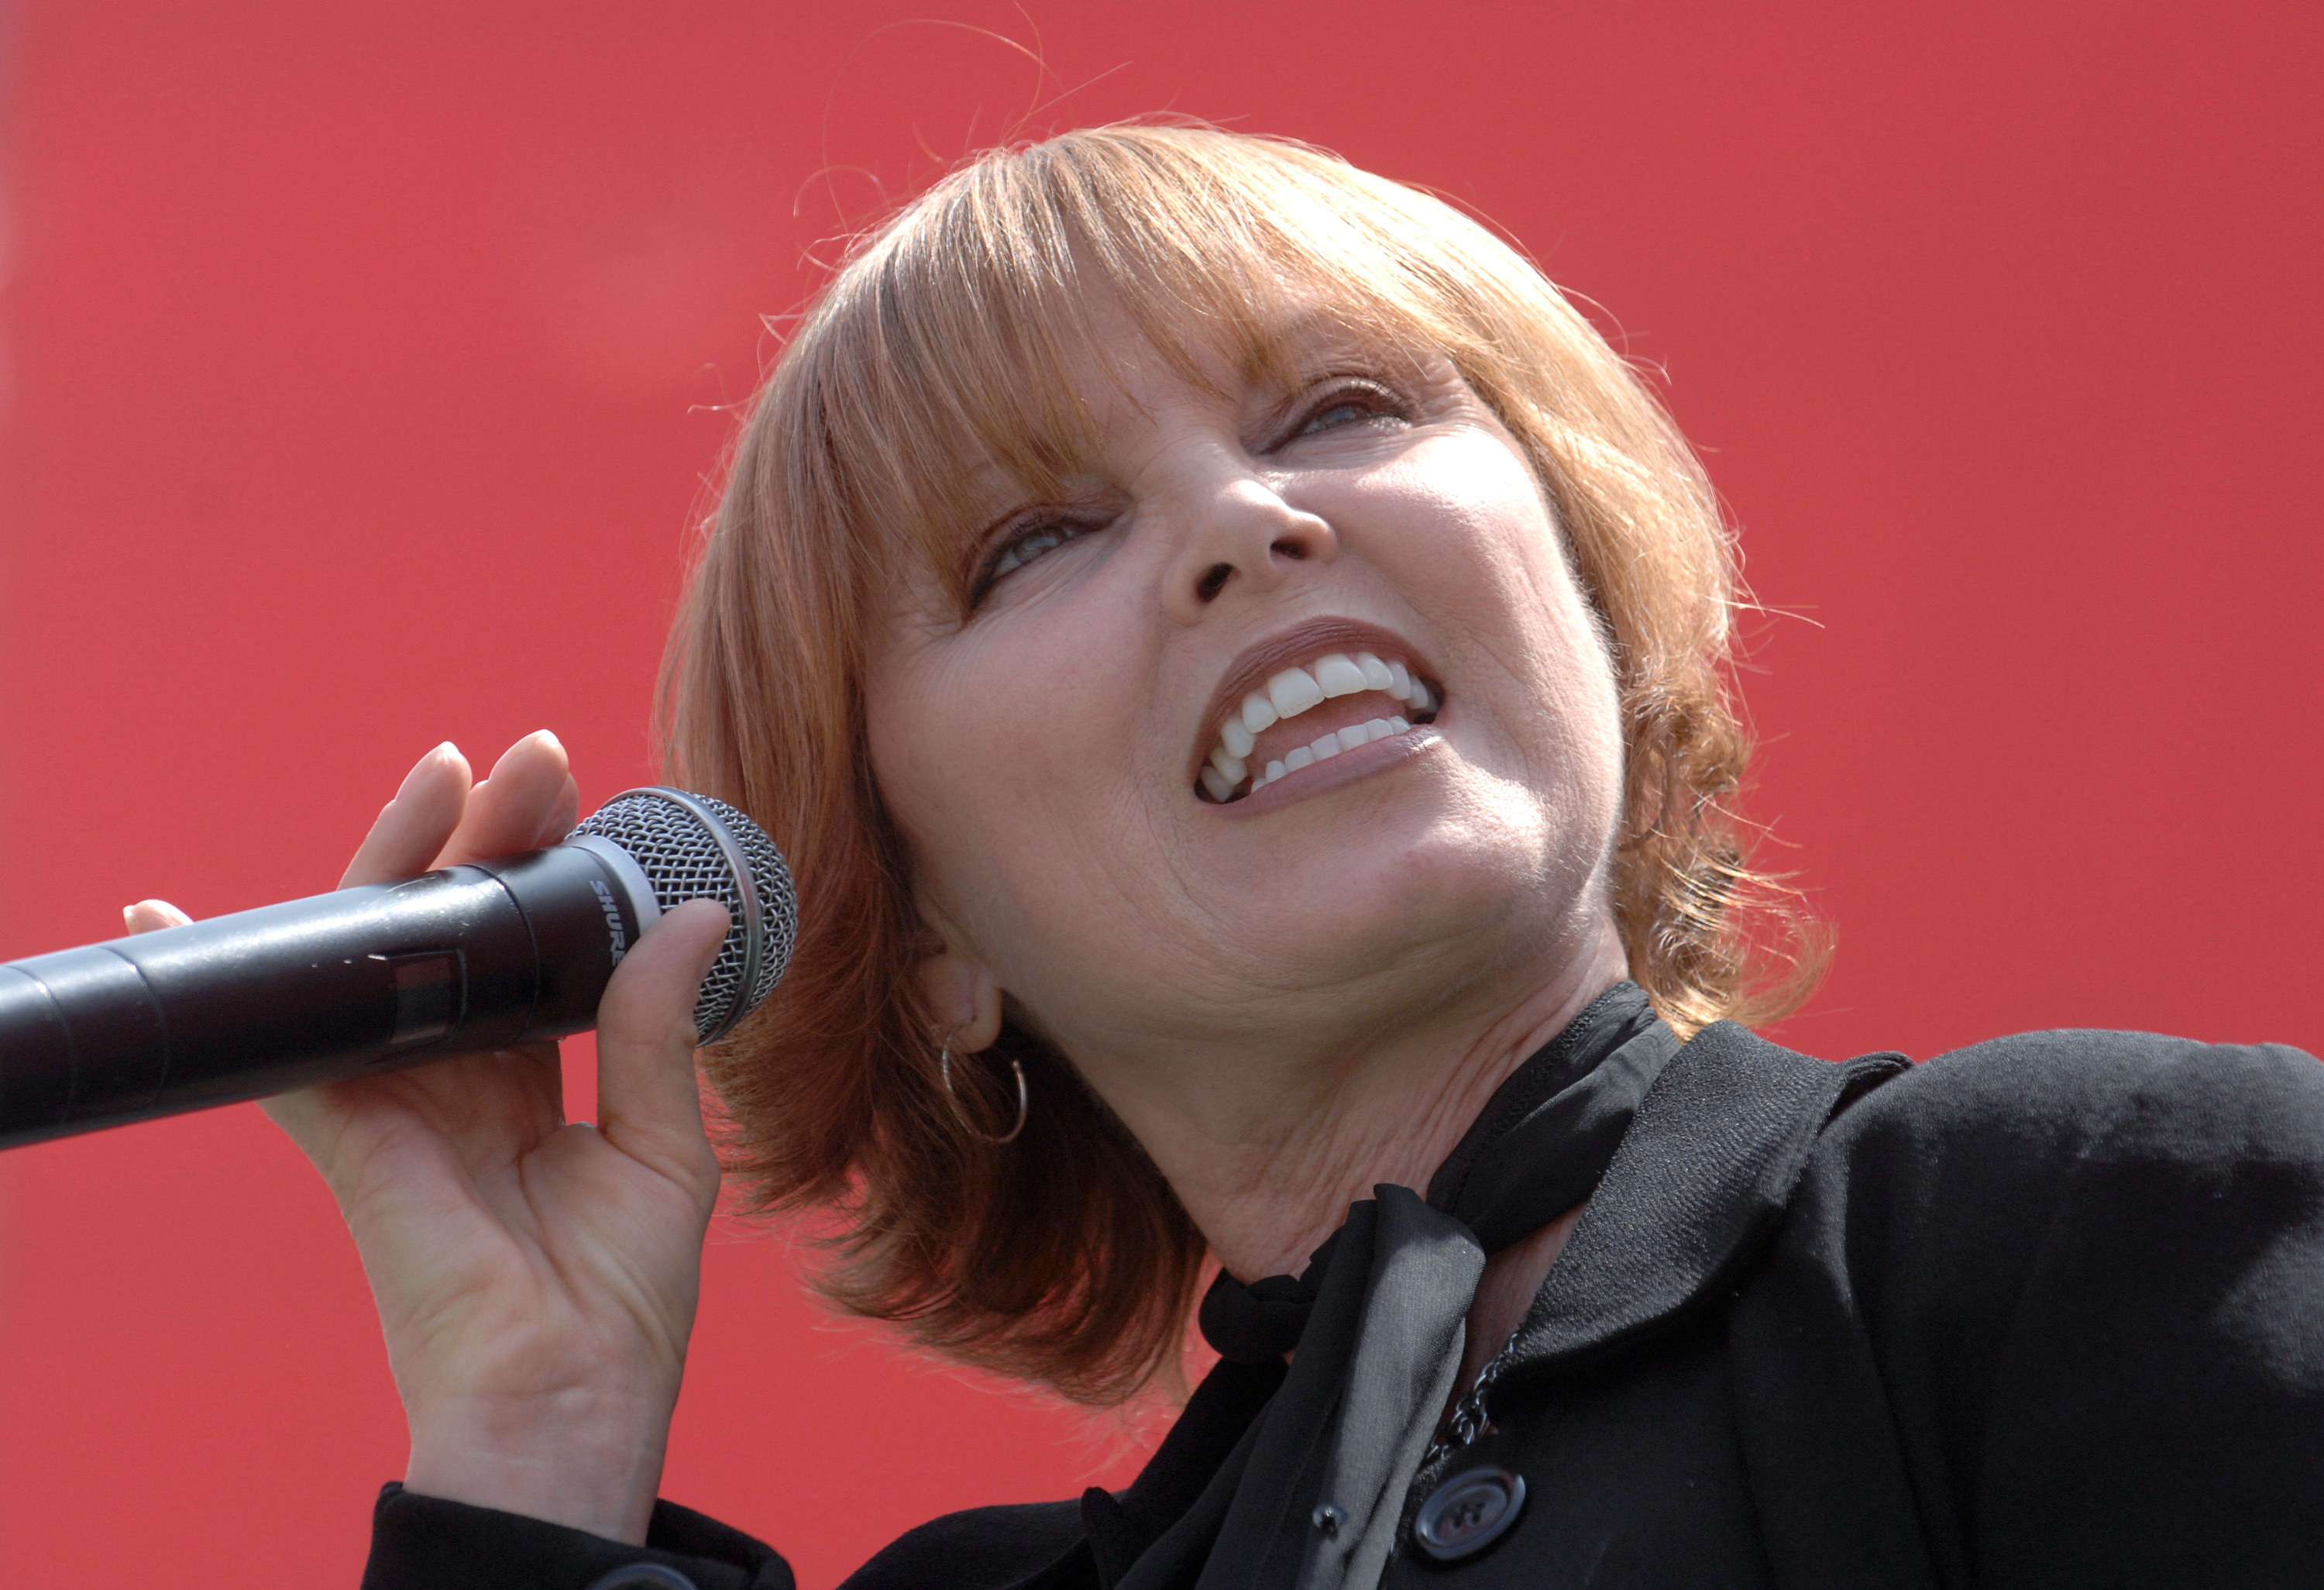 Pat Benatar won't perform 'Hit Me with Your Best Shot' anymore Reuters